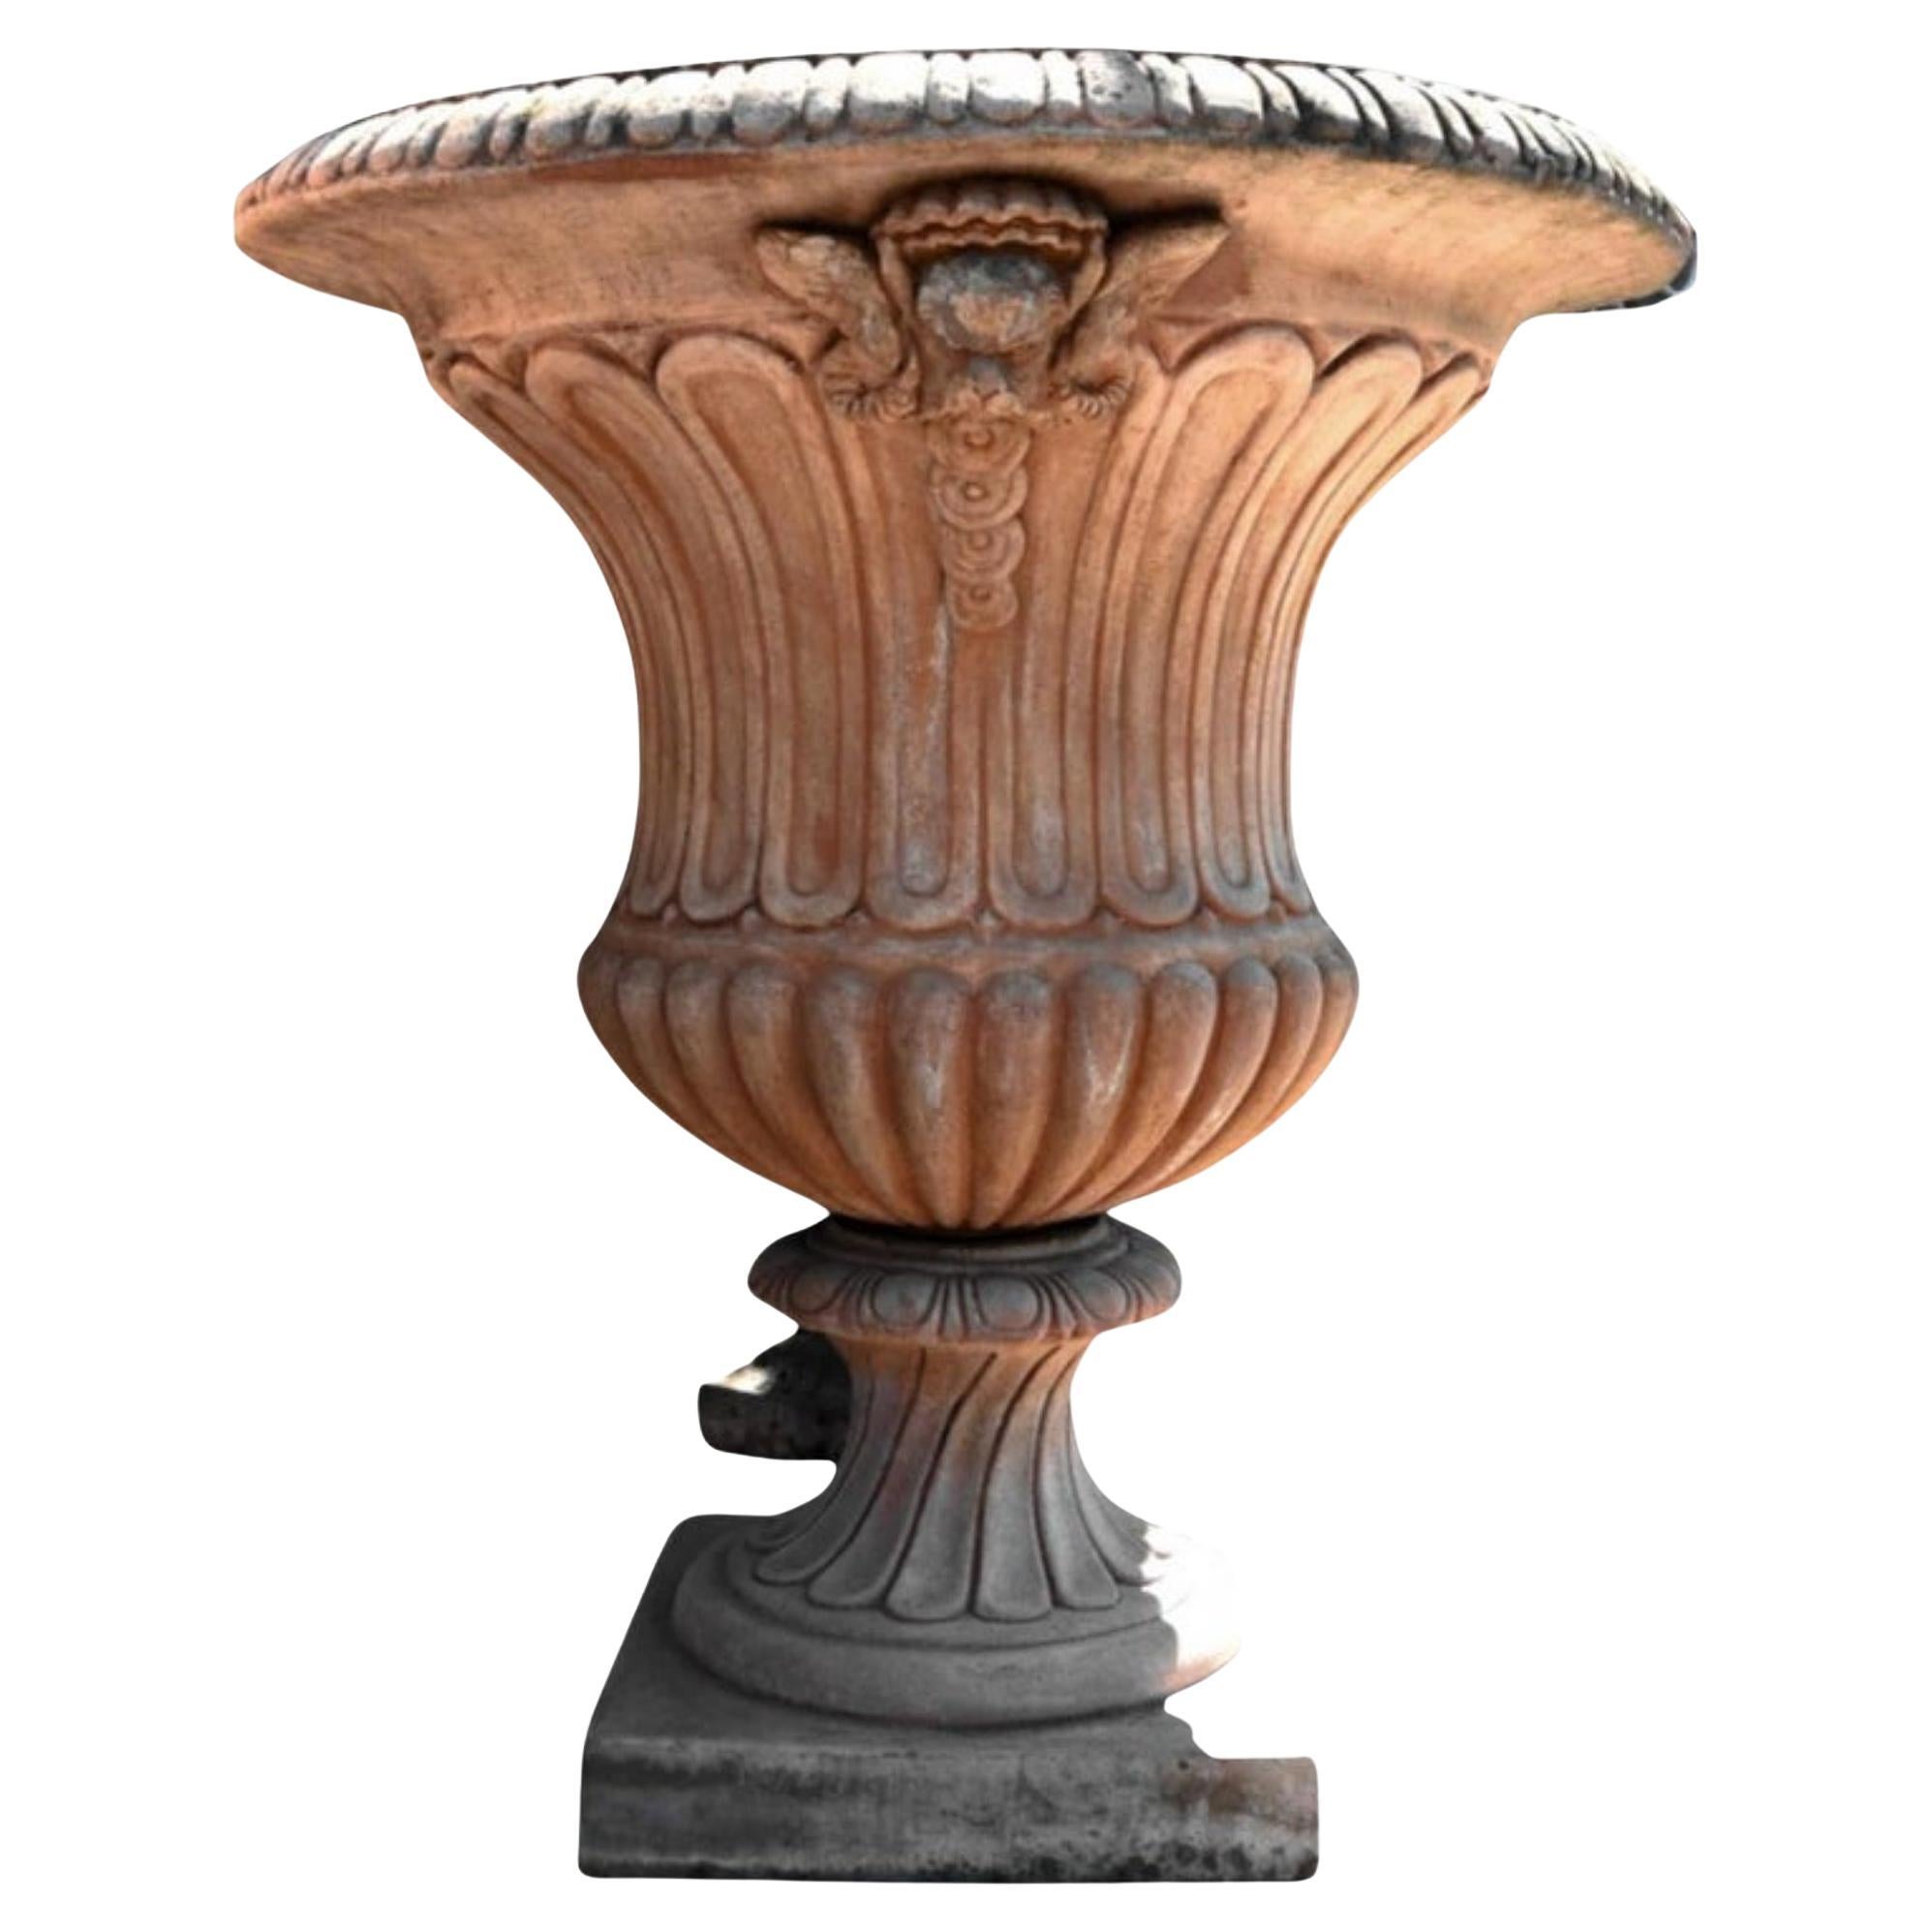 Large Mediceo Vase Baccellato Terracotta Goblet, Early 20th Century For Sale